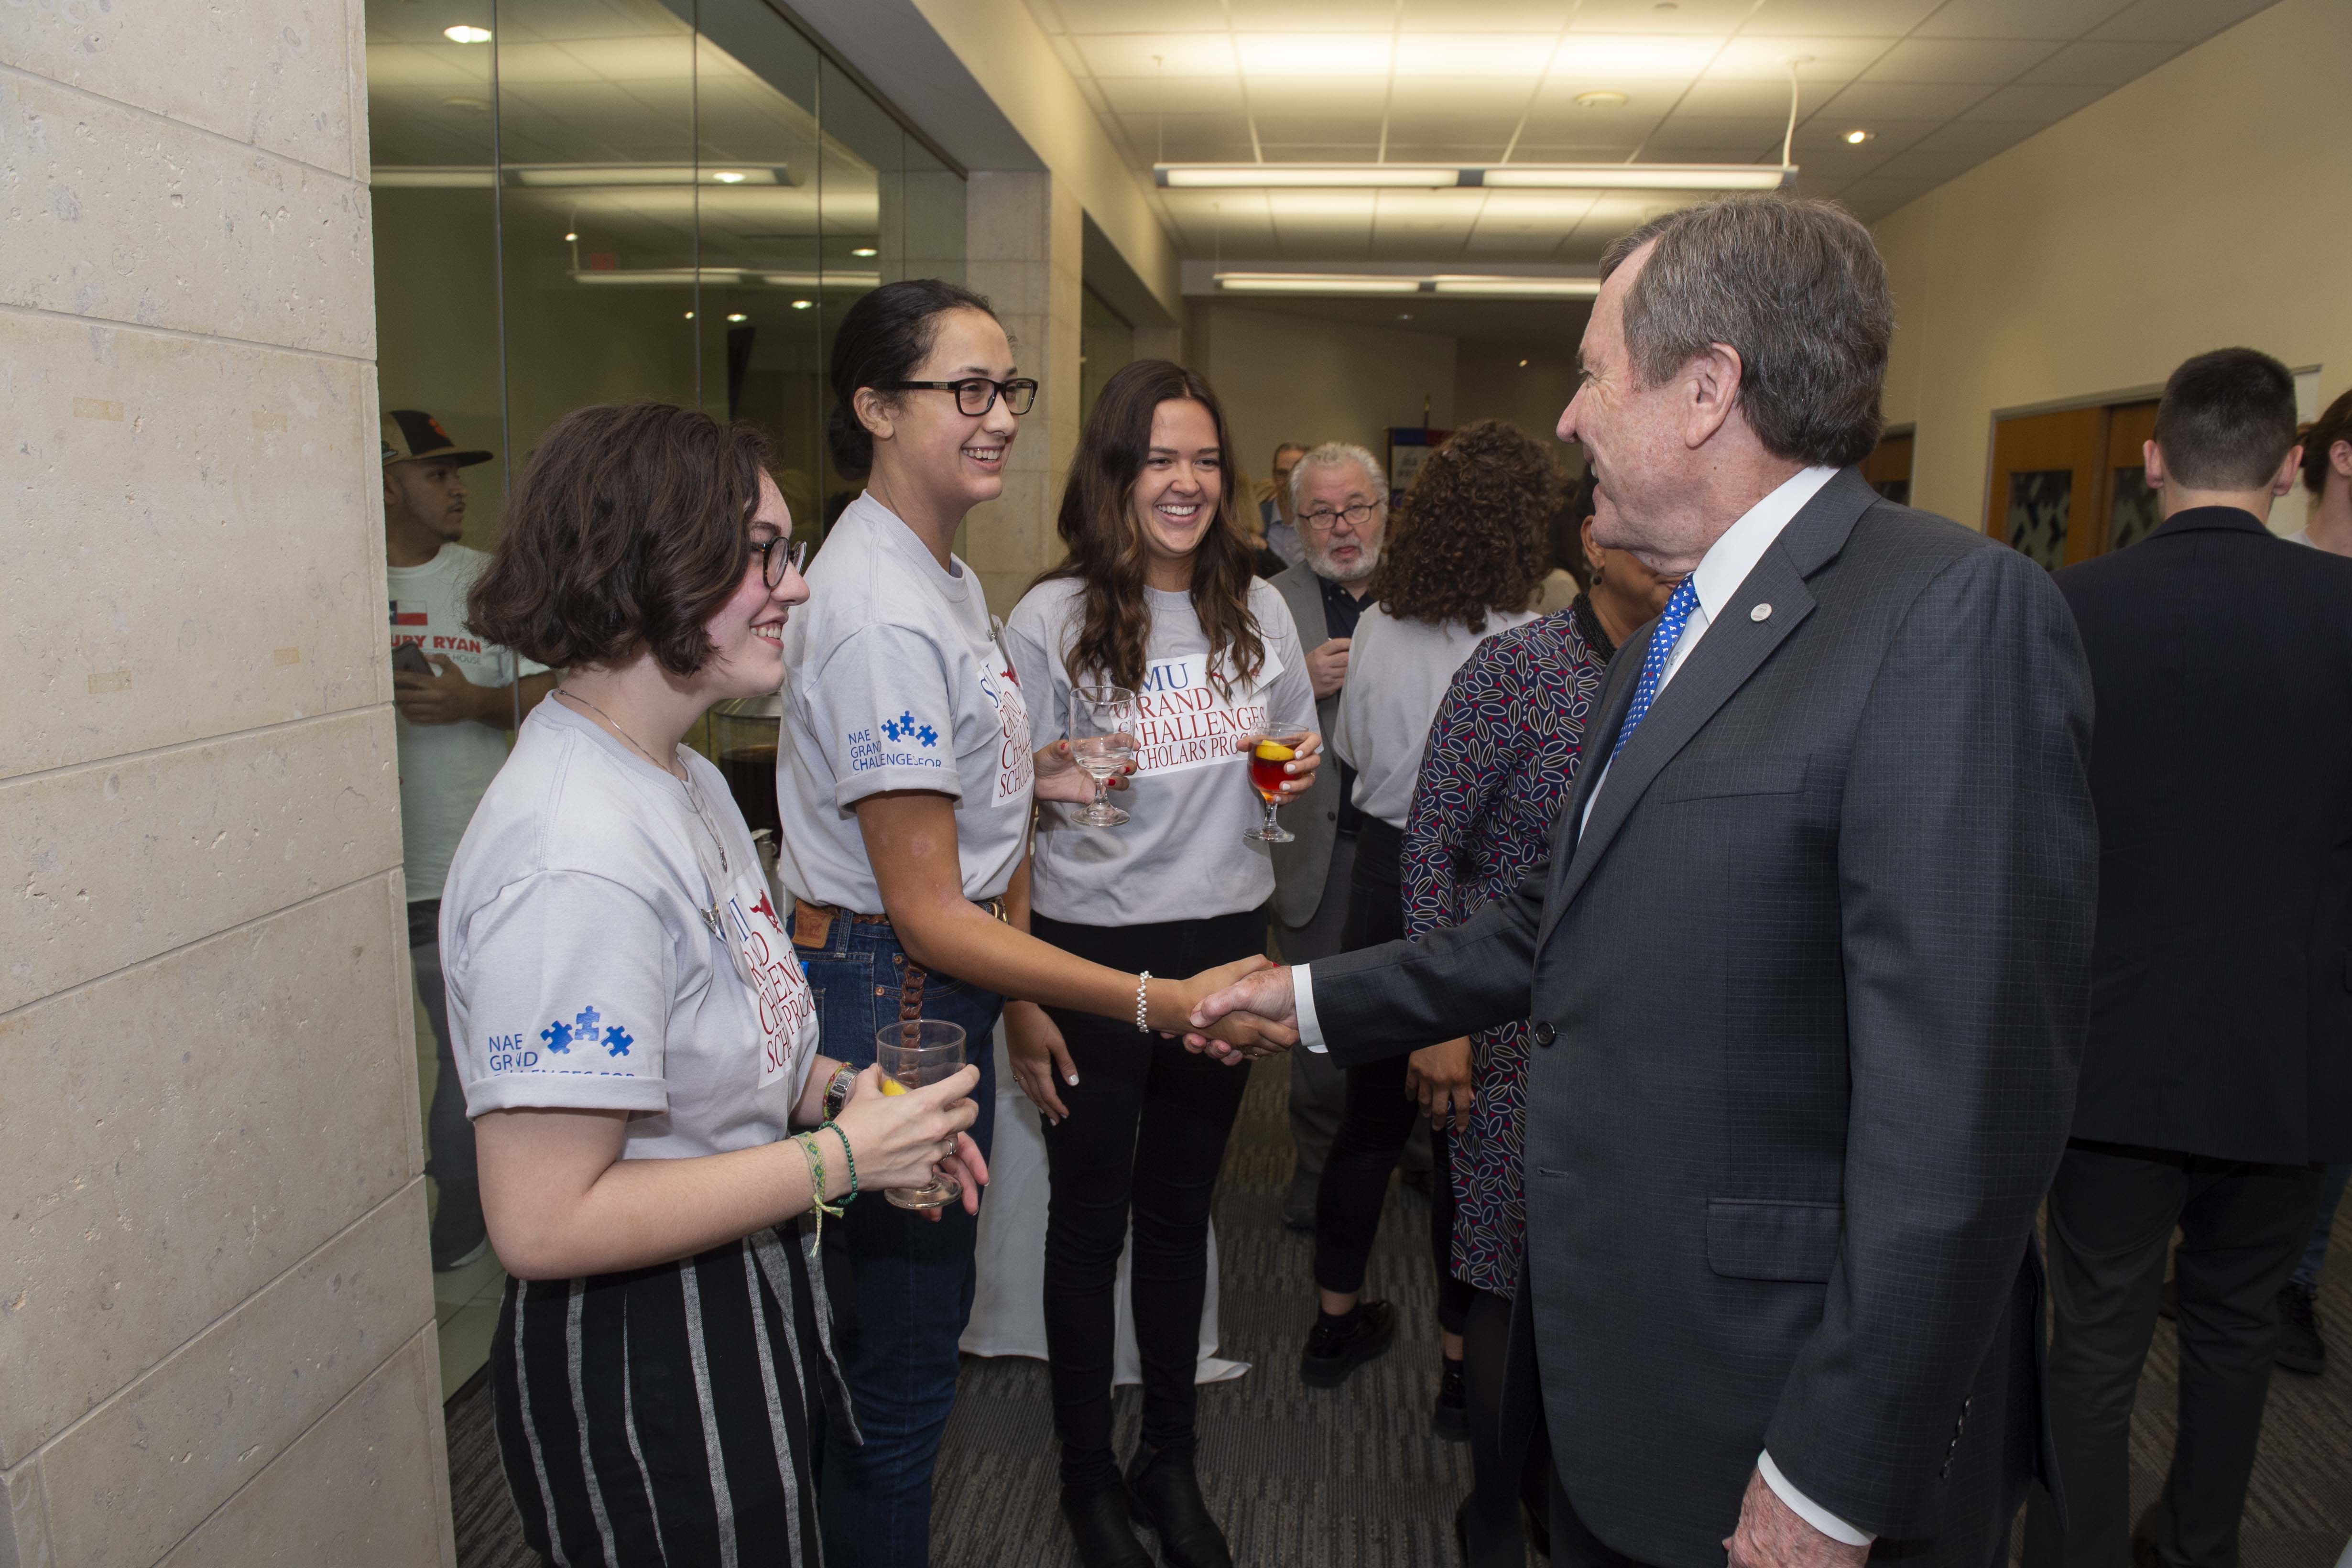 Three female President's Scholars engaged in conversation with University President Robert Gerald Turner. The middle student is shaking his hand.